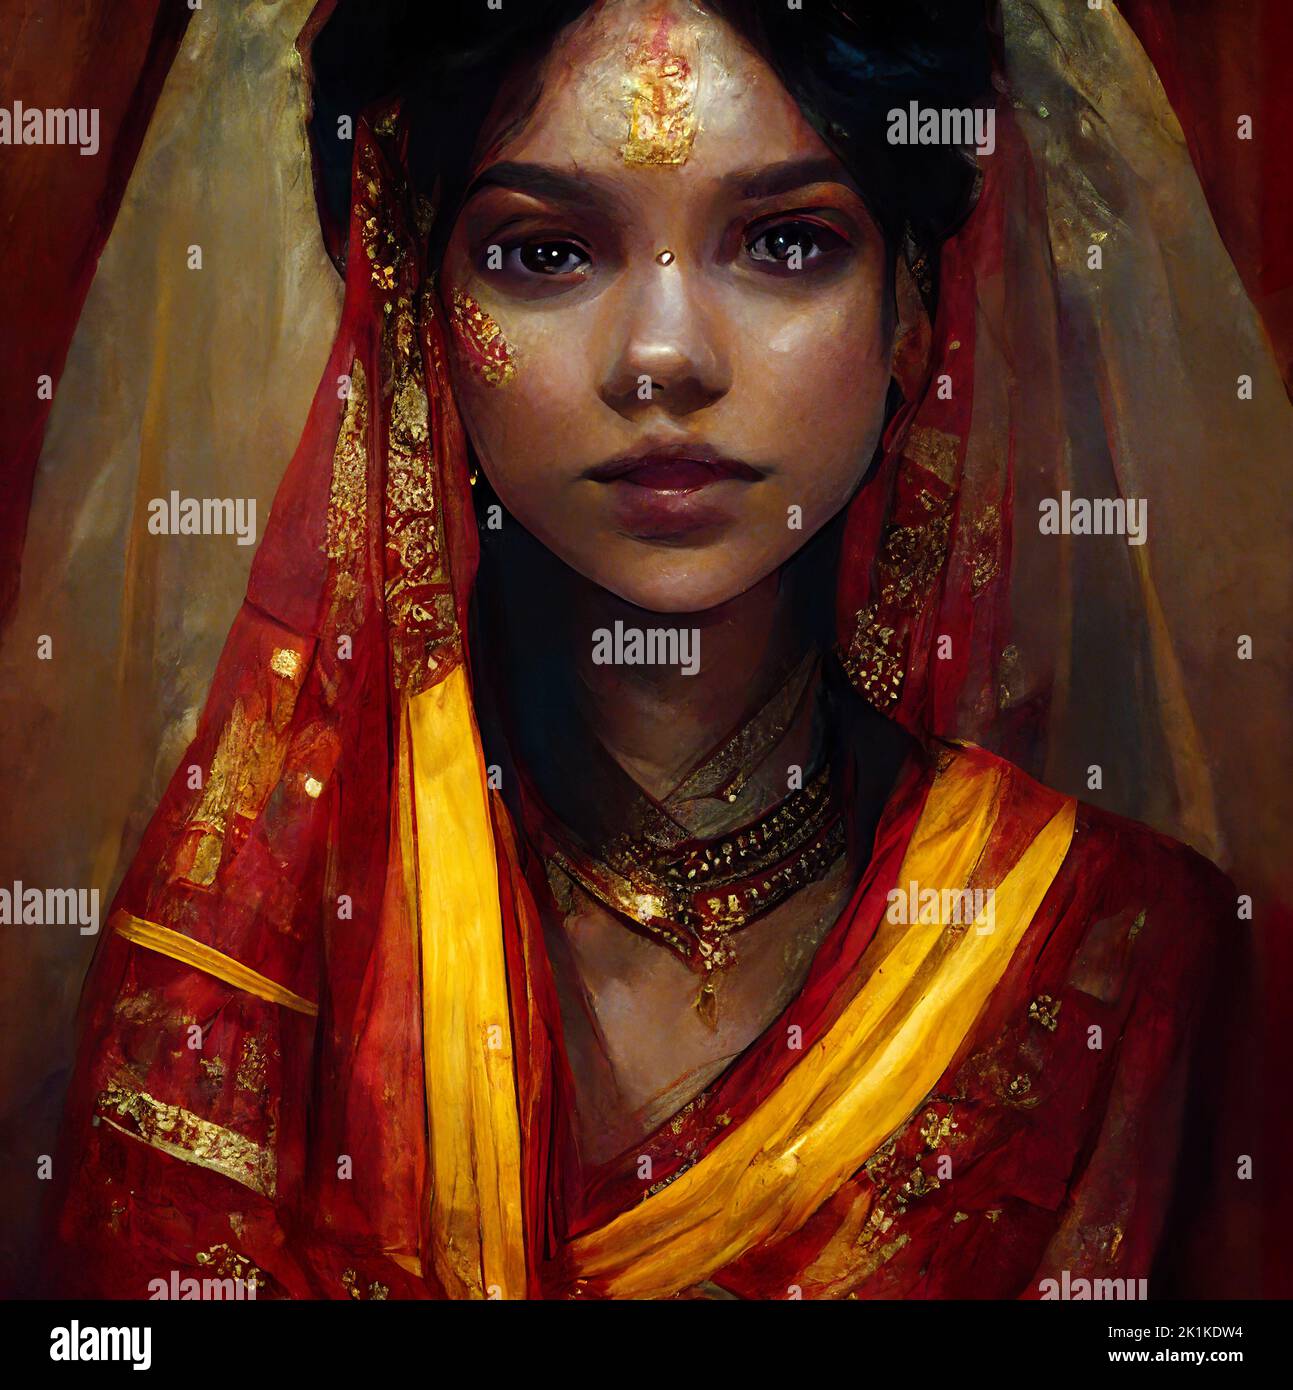 Digitally generated conceptual portrait of an Indian bride in a traditional wedding dress Stock Photo